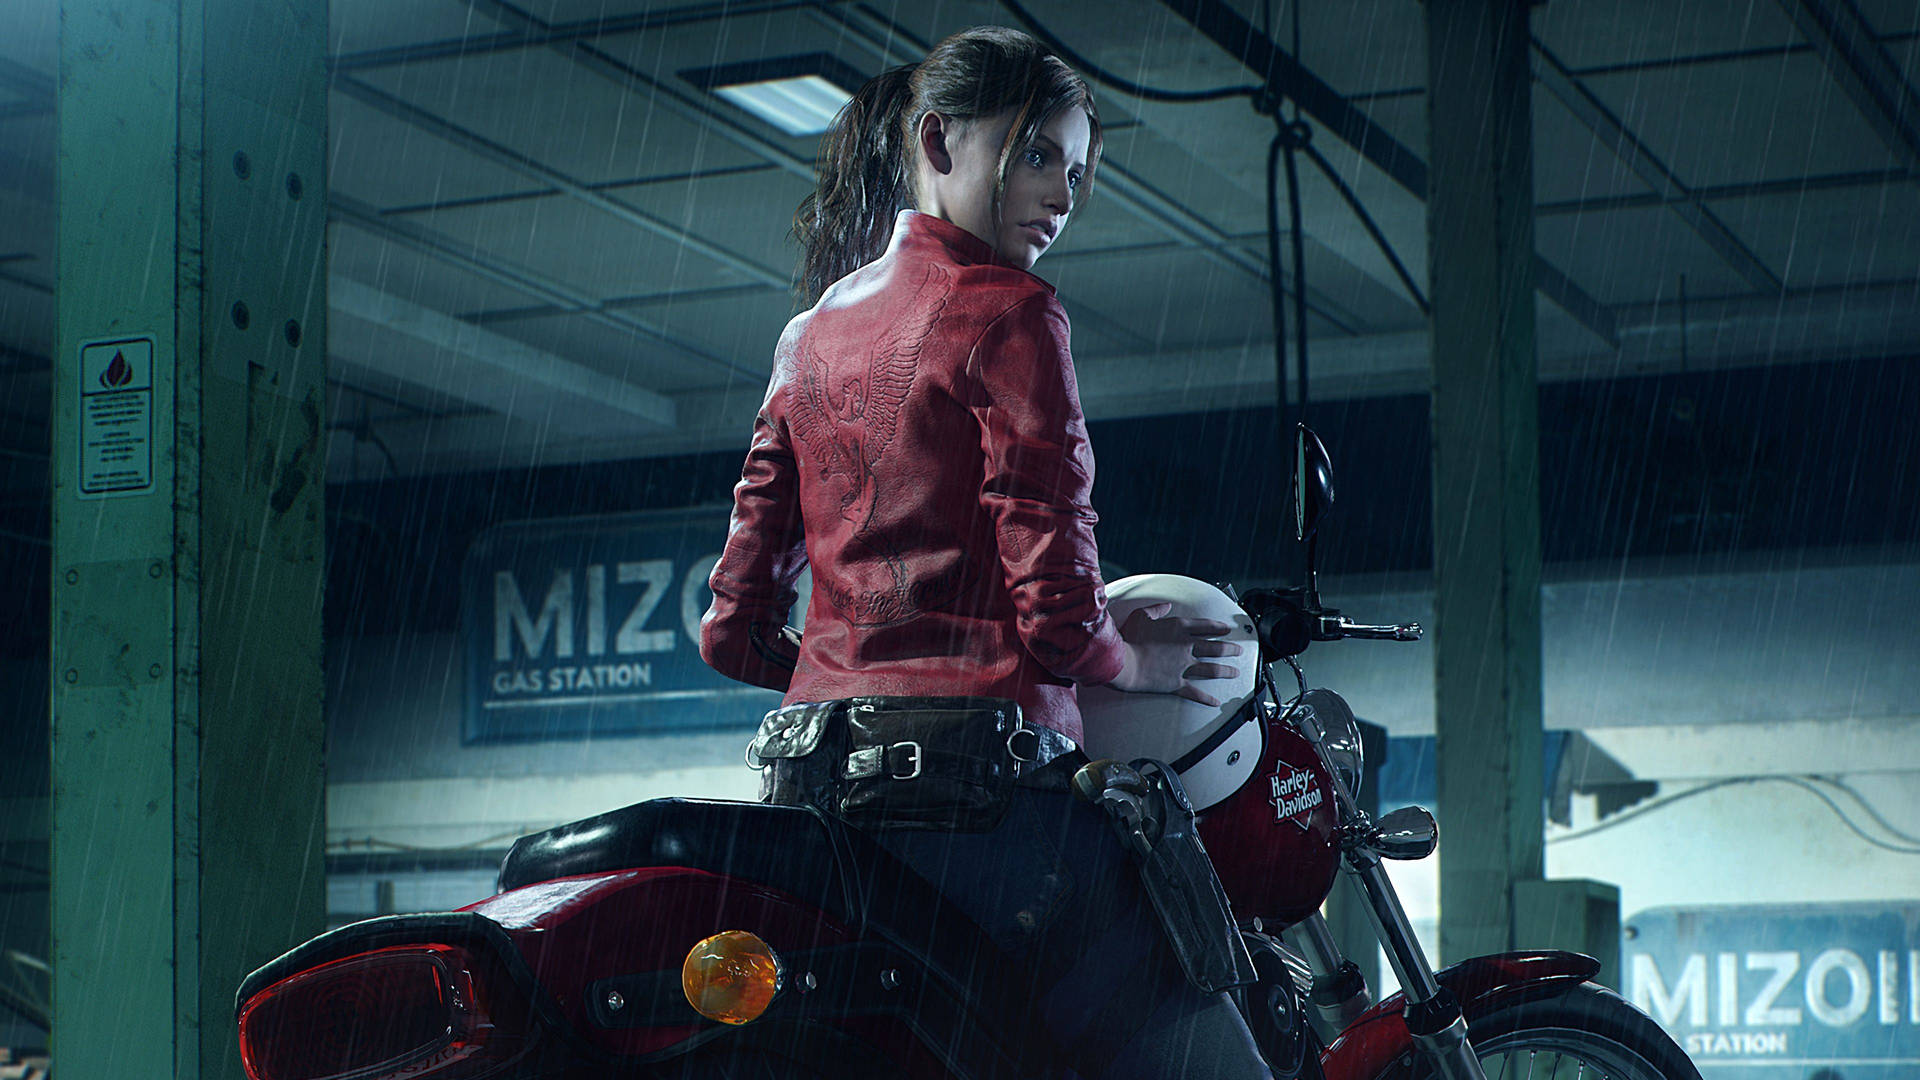 Two-wheeled Escape - Claire Redfield Takes on New Threats with her Motorcycle Wallpaper